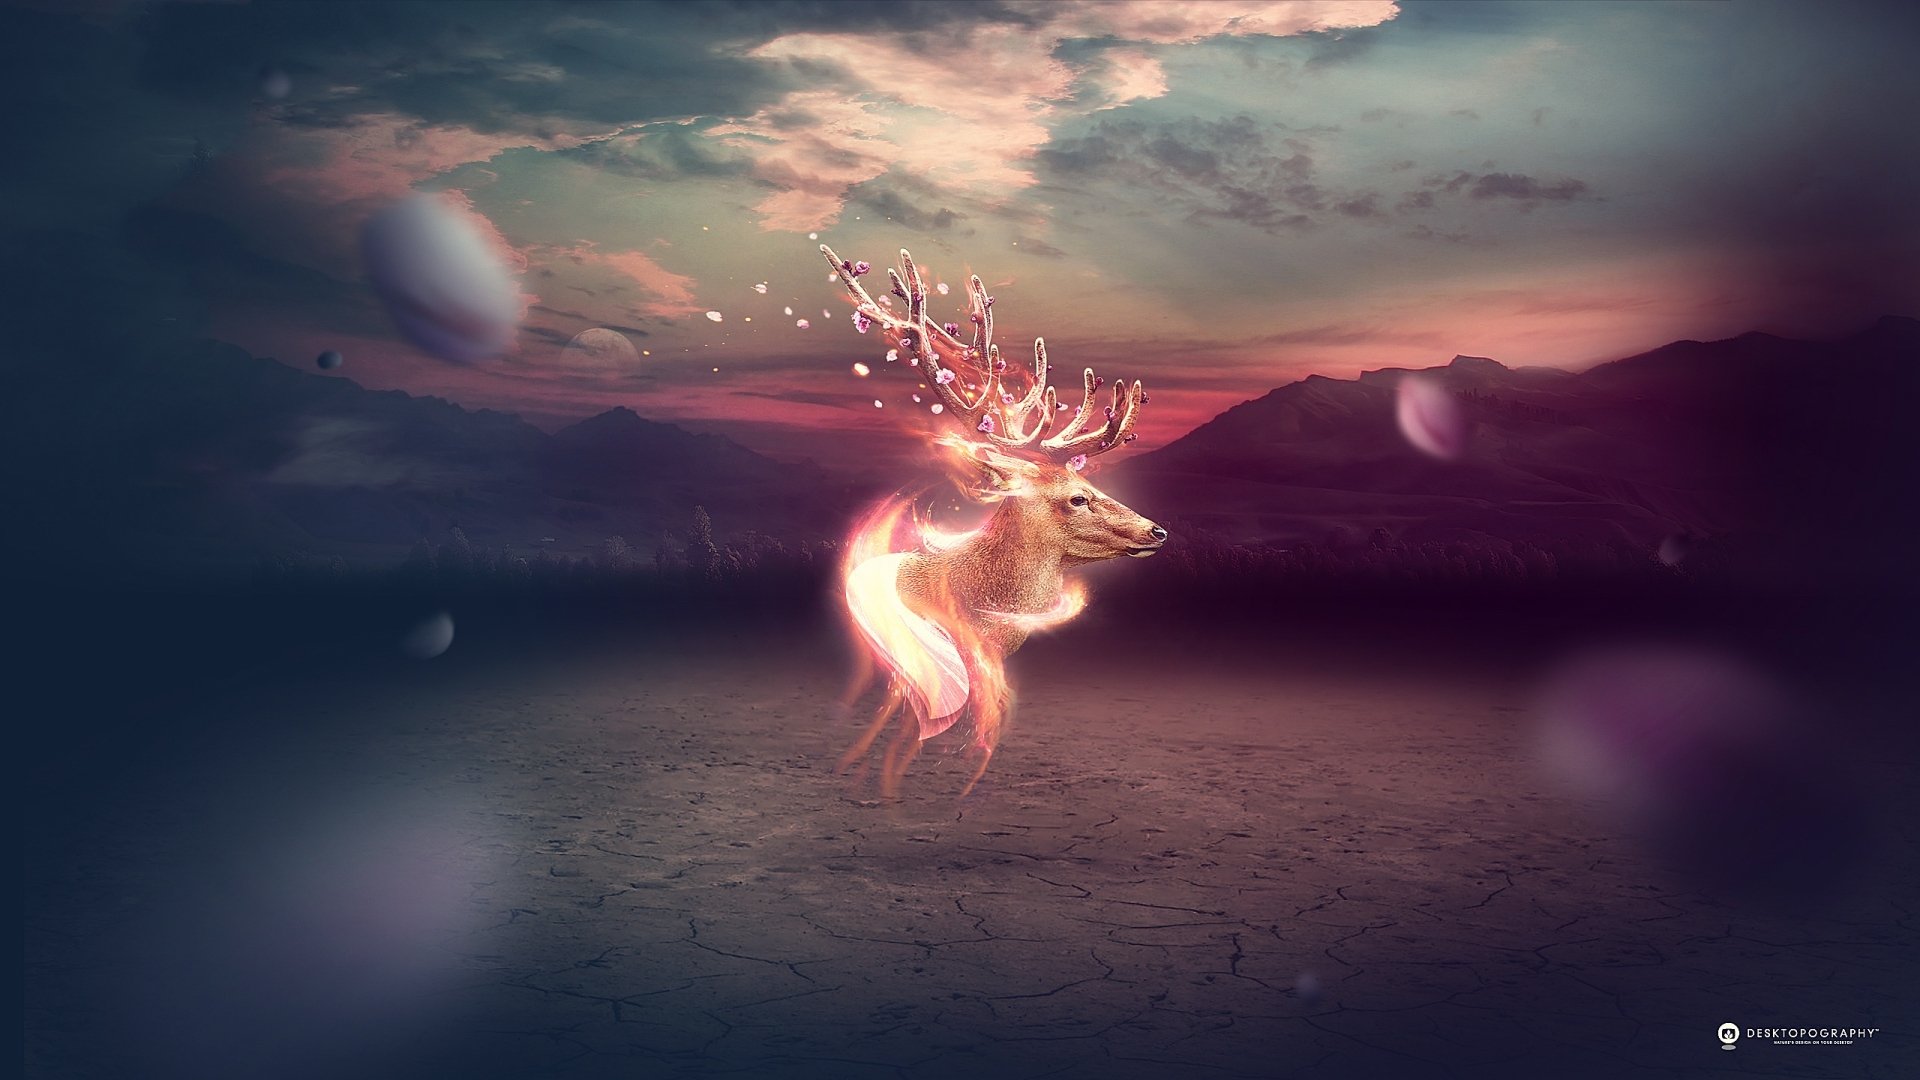 Majestic Hd Deer Fantasy By Spindle 3326